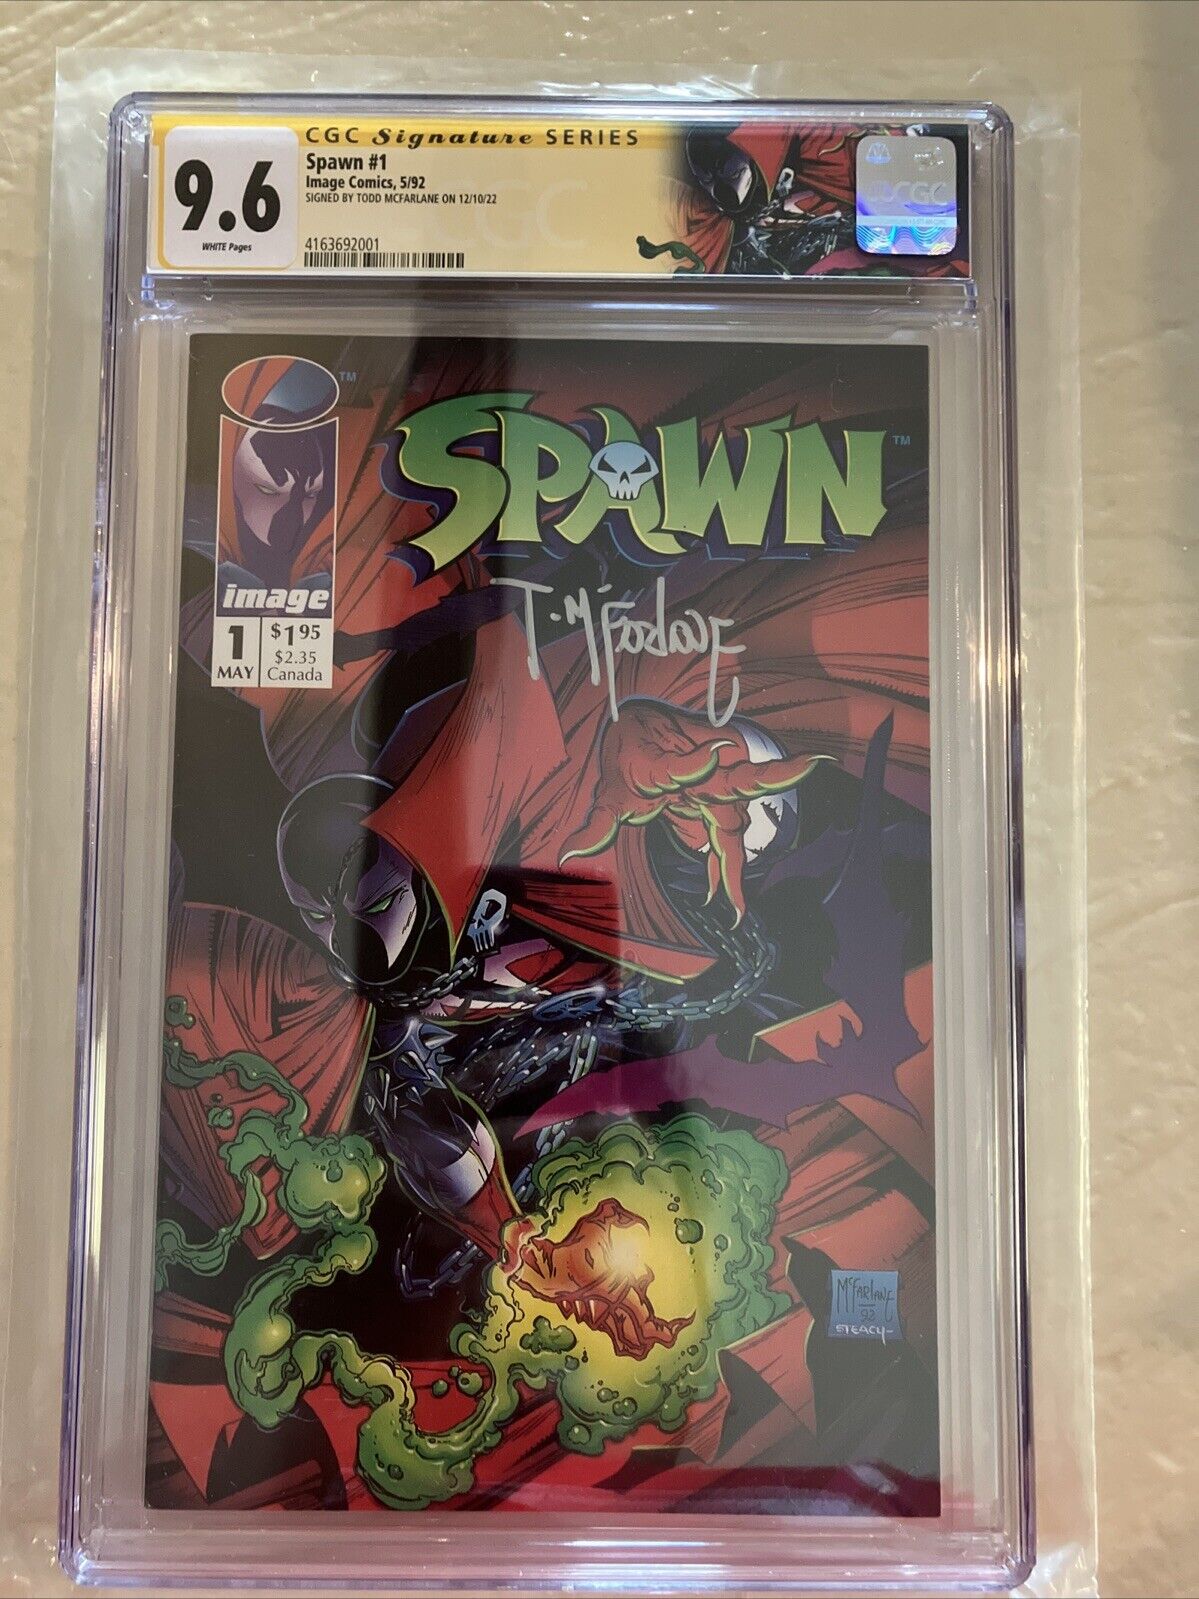 Spawn #1 CGC SS 9.6 Signed by Todd McFarlane 5/1992 1st Al Simmons Custom Label